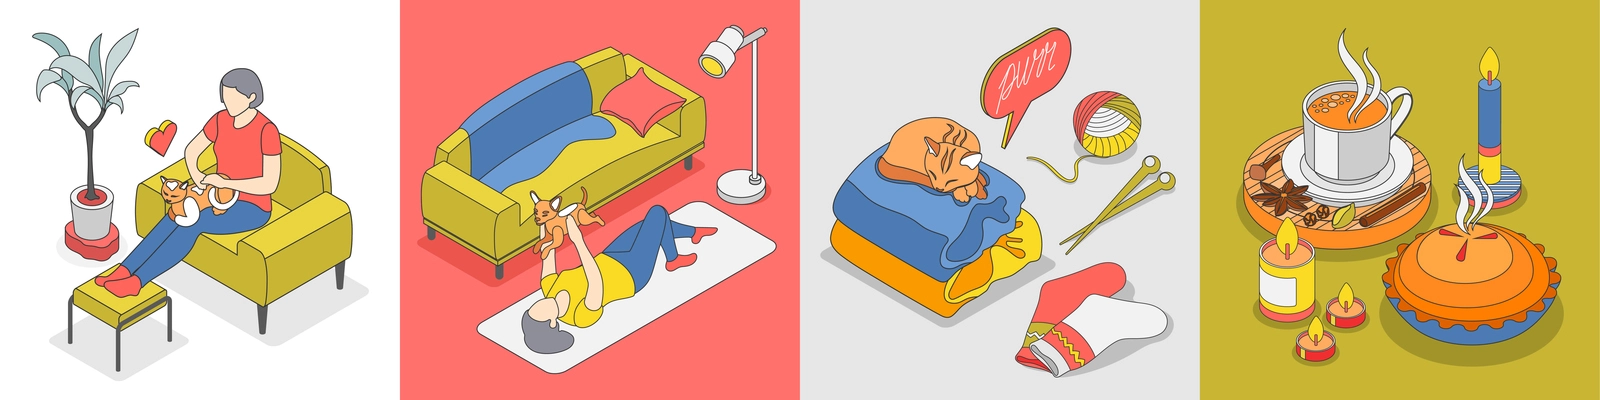 Hygge lifestyle isometric icon set rest with cat dog soft cozy clothes and warm drinks vector illustration